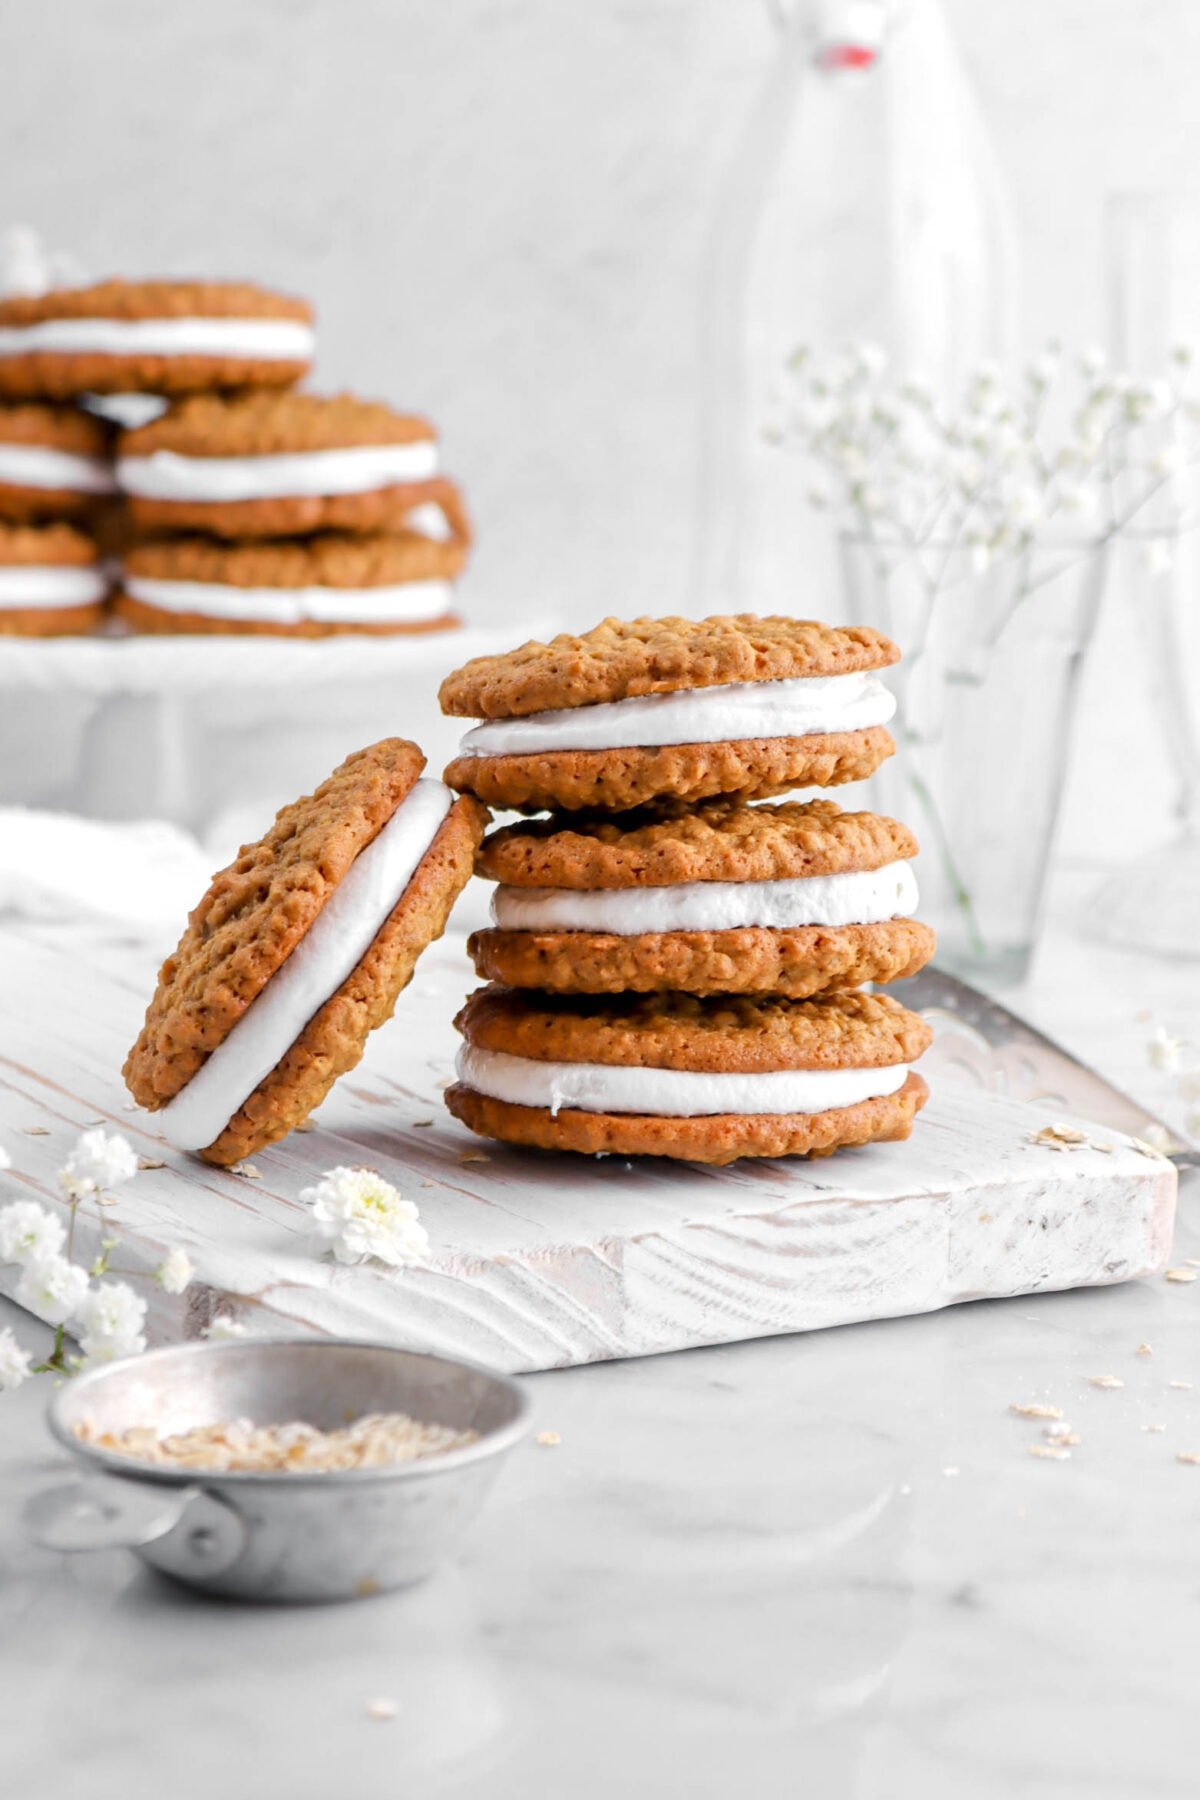 three stacked oatmeal cream pies with one leaning against stack on wood board with more oatmeal cream pies behind on white cake plate.